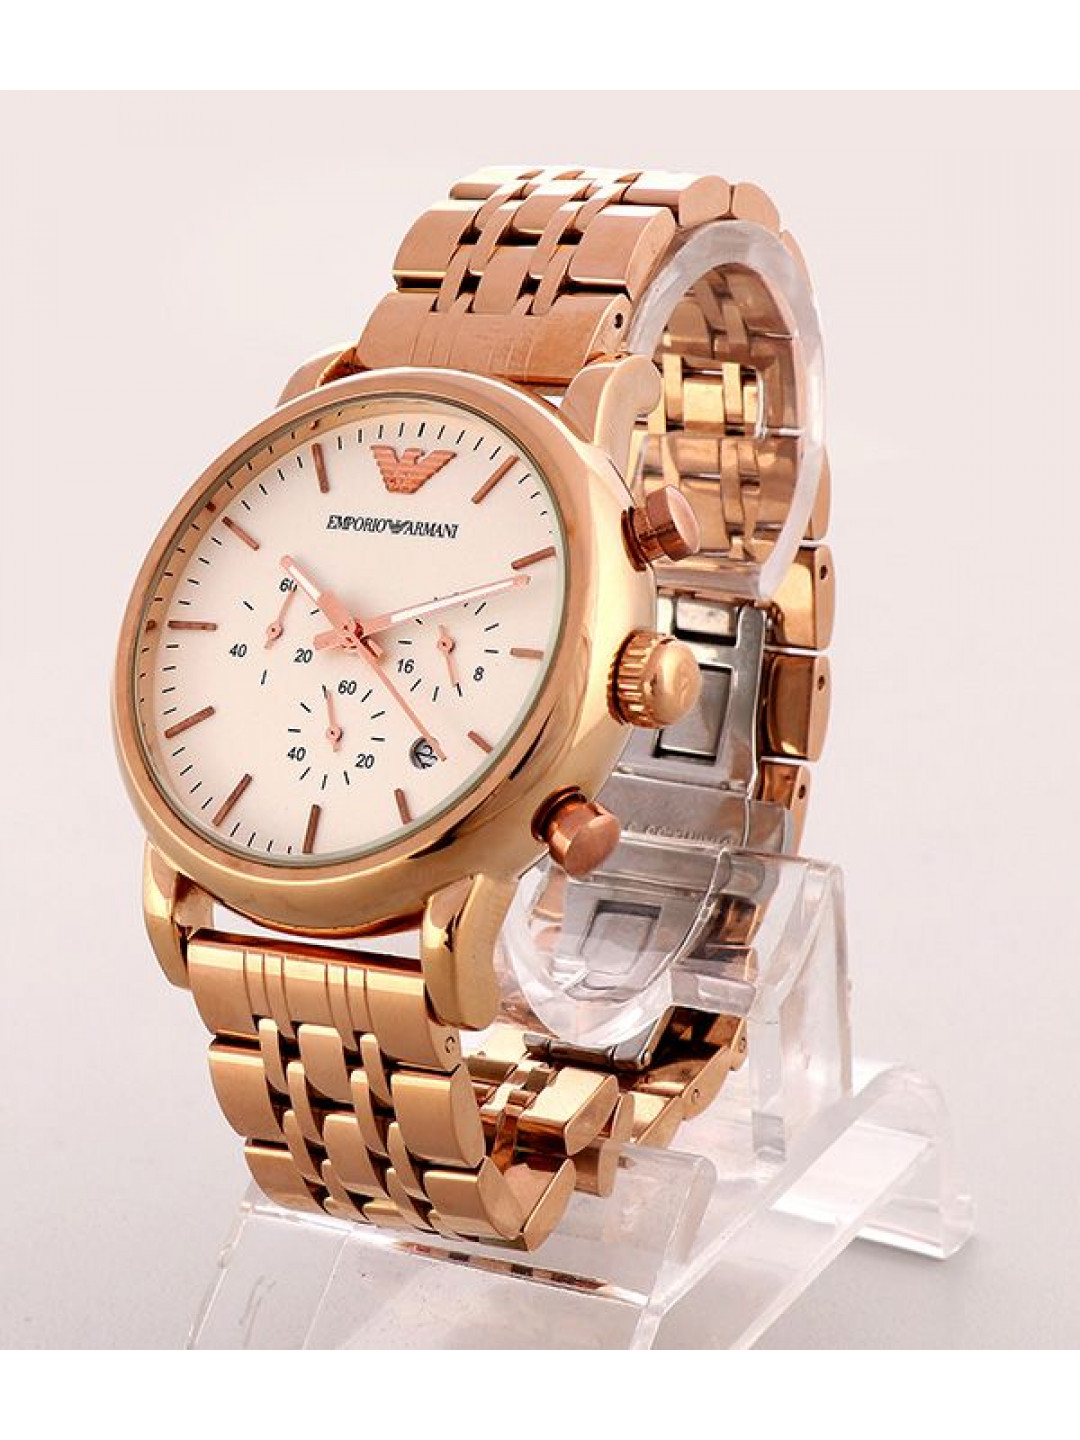 white and rose gold armani watch